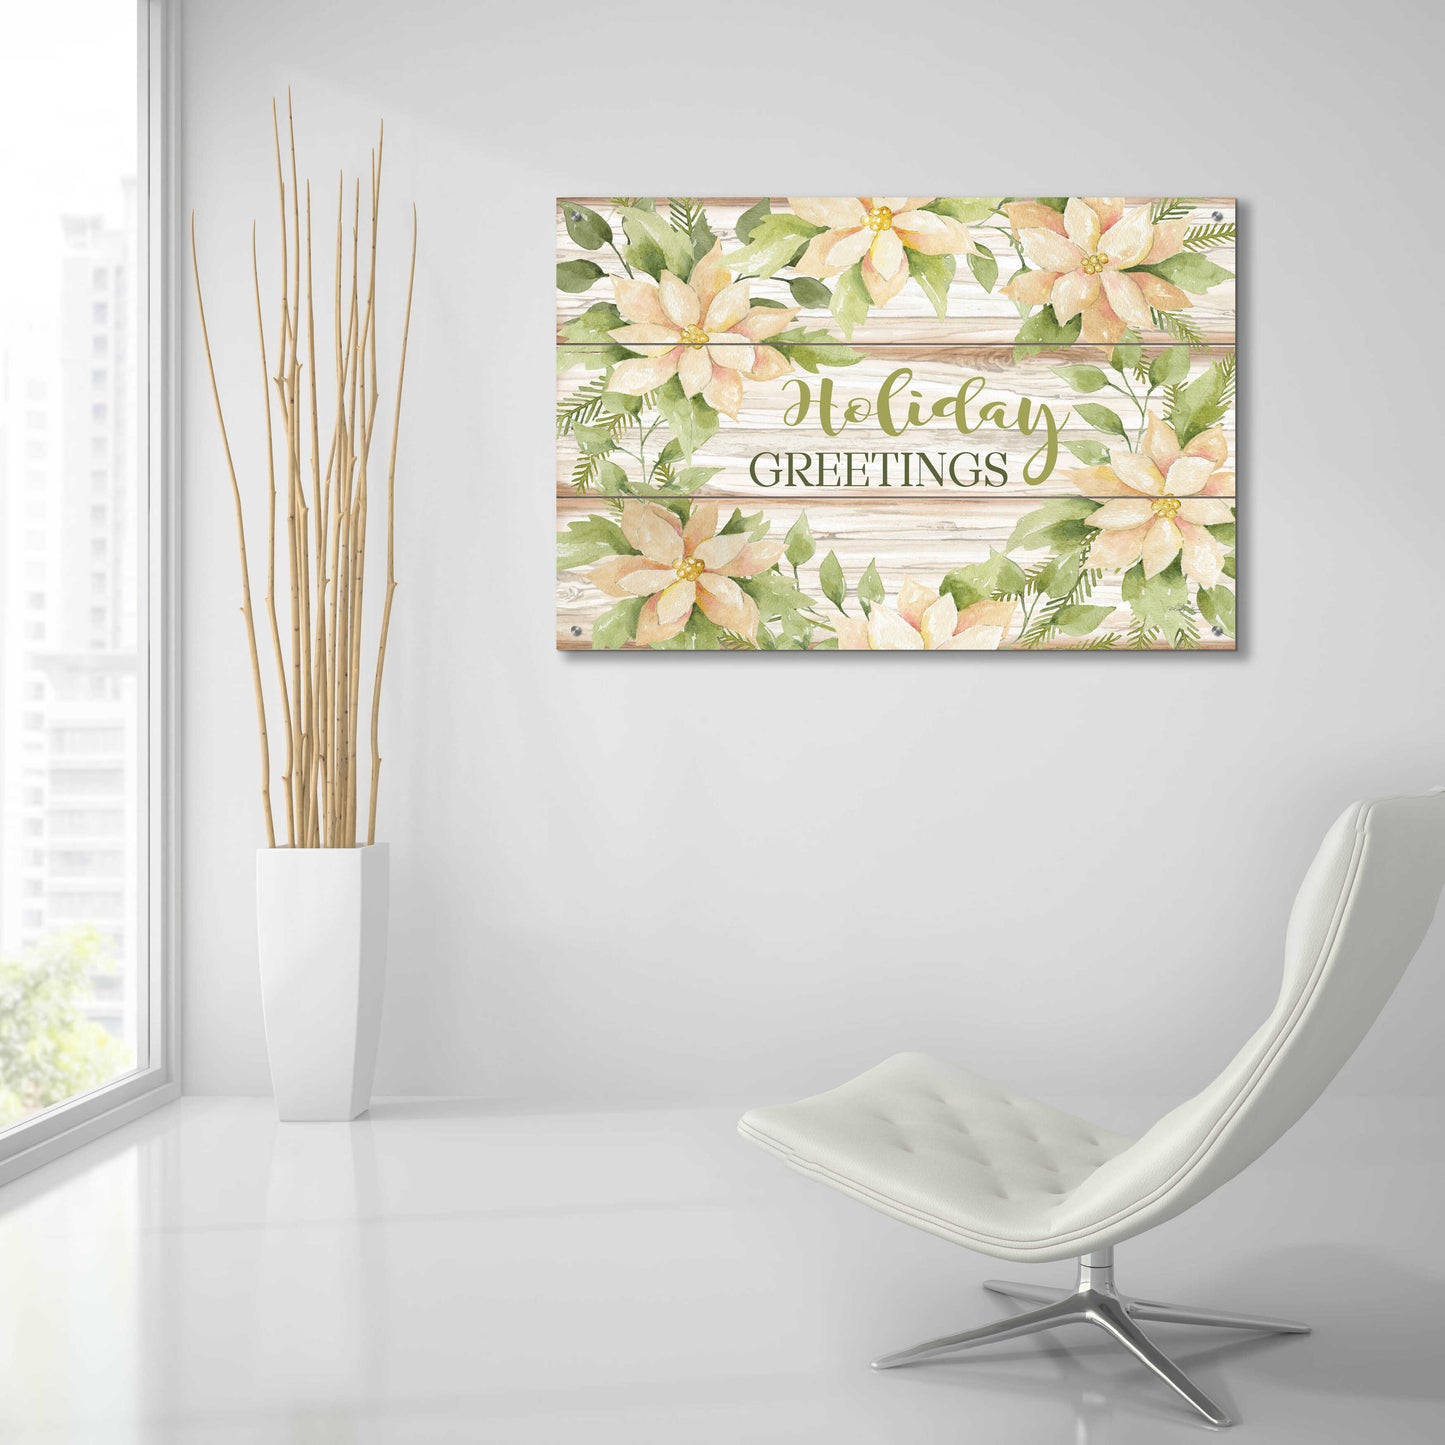 Epic Art 'Holiday Greetings' by Cindy Jacobs, Acrylic Glass Wall Art,36x24